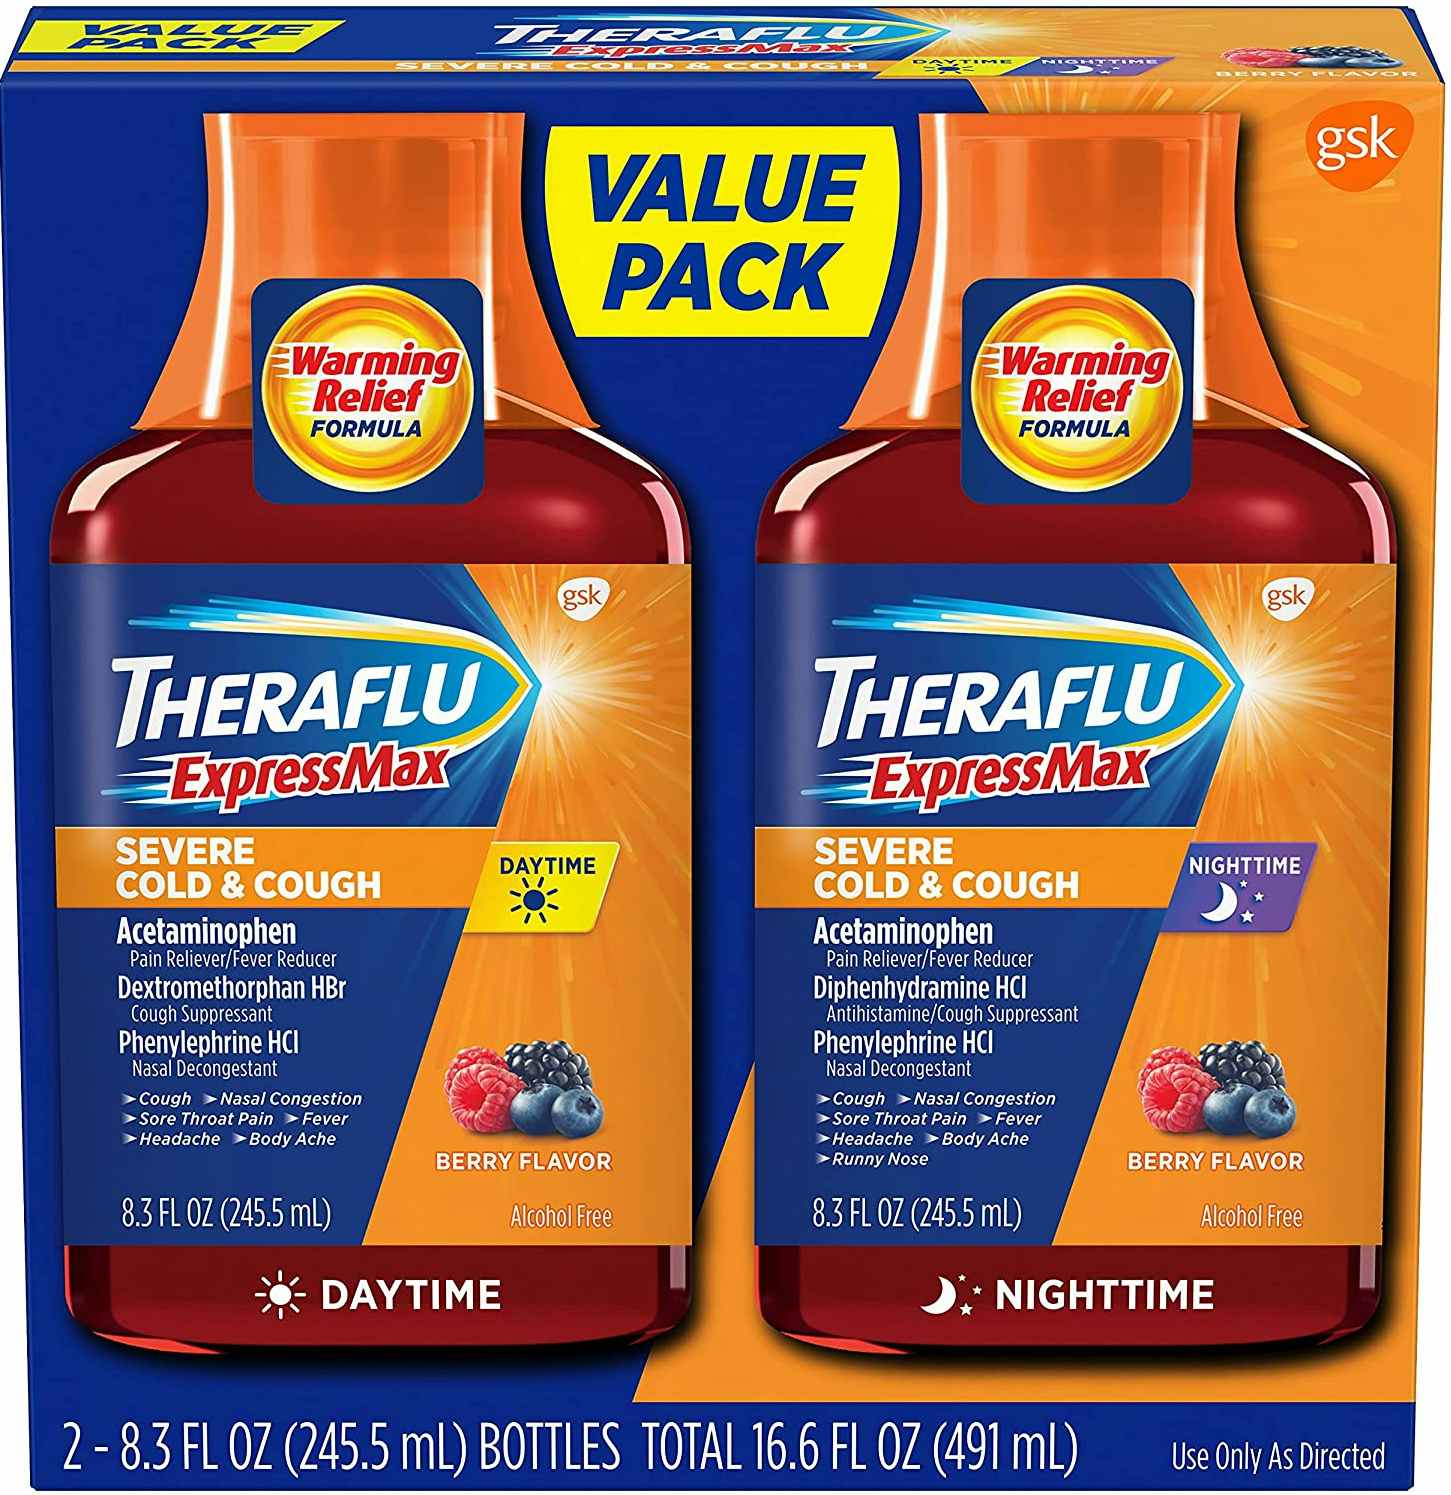 A pack of two Theraflu cough syrups.